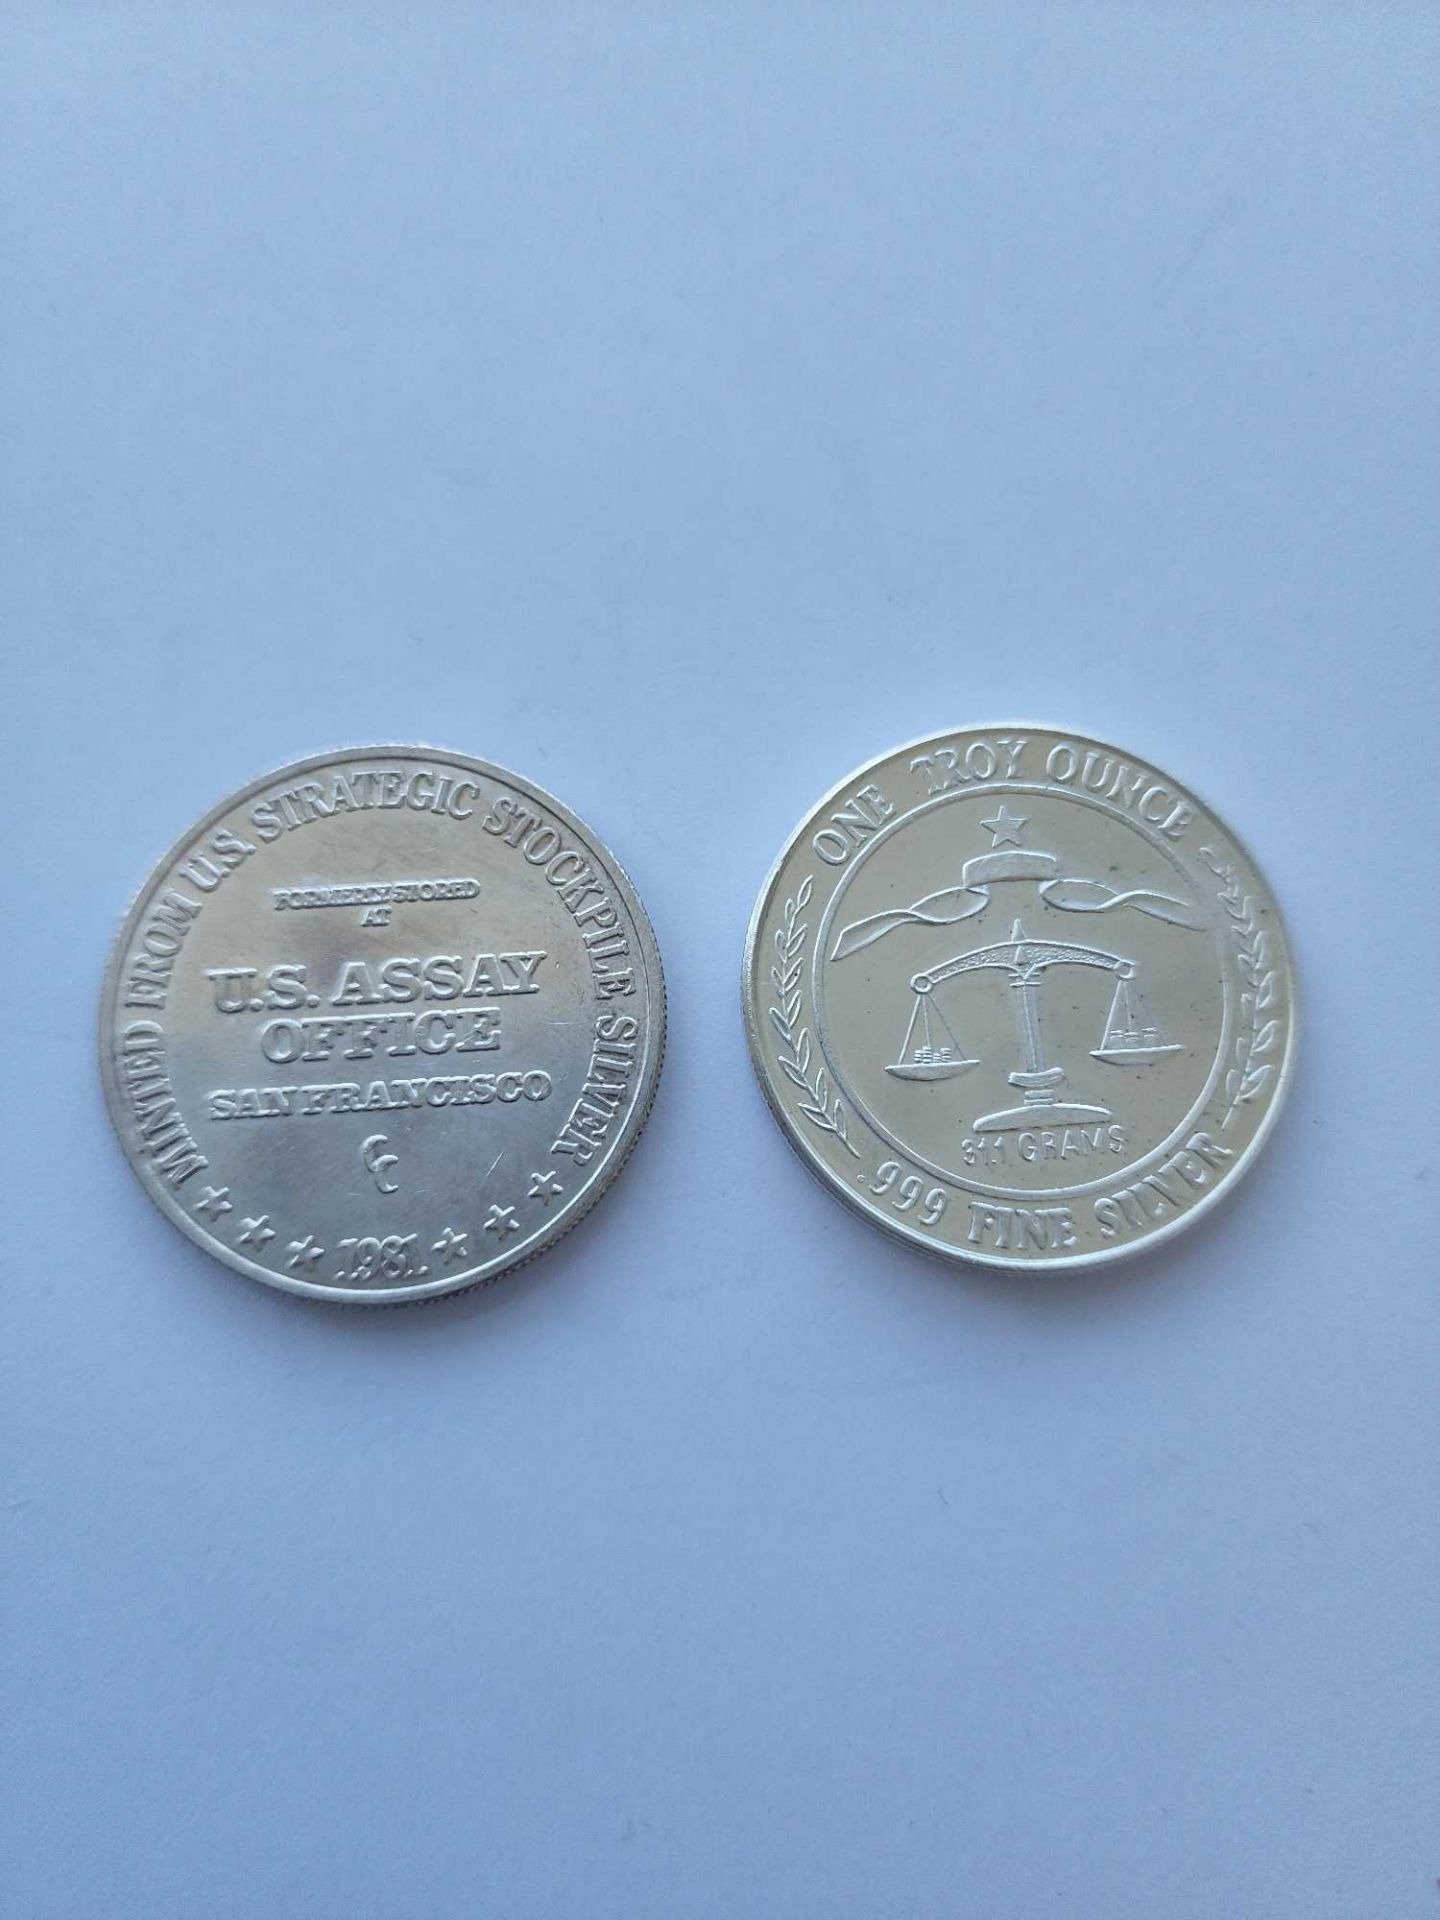 2 vintage silver coins - Image 2 of 2